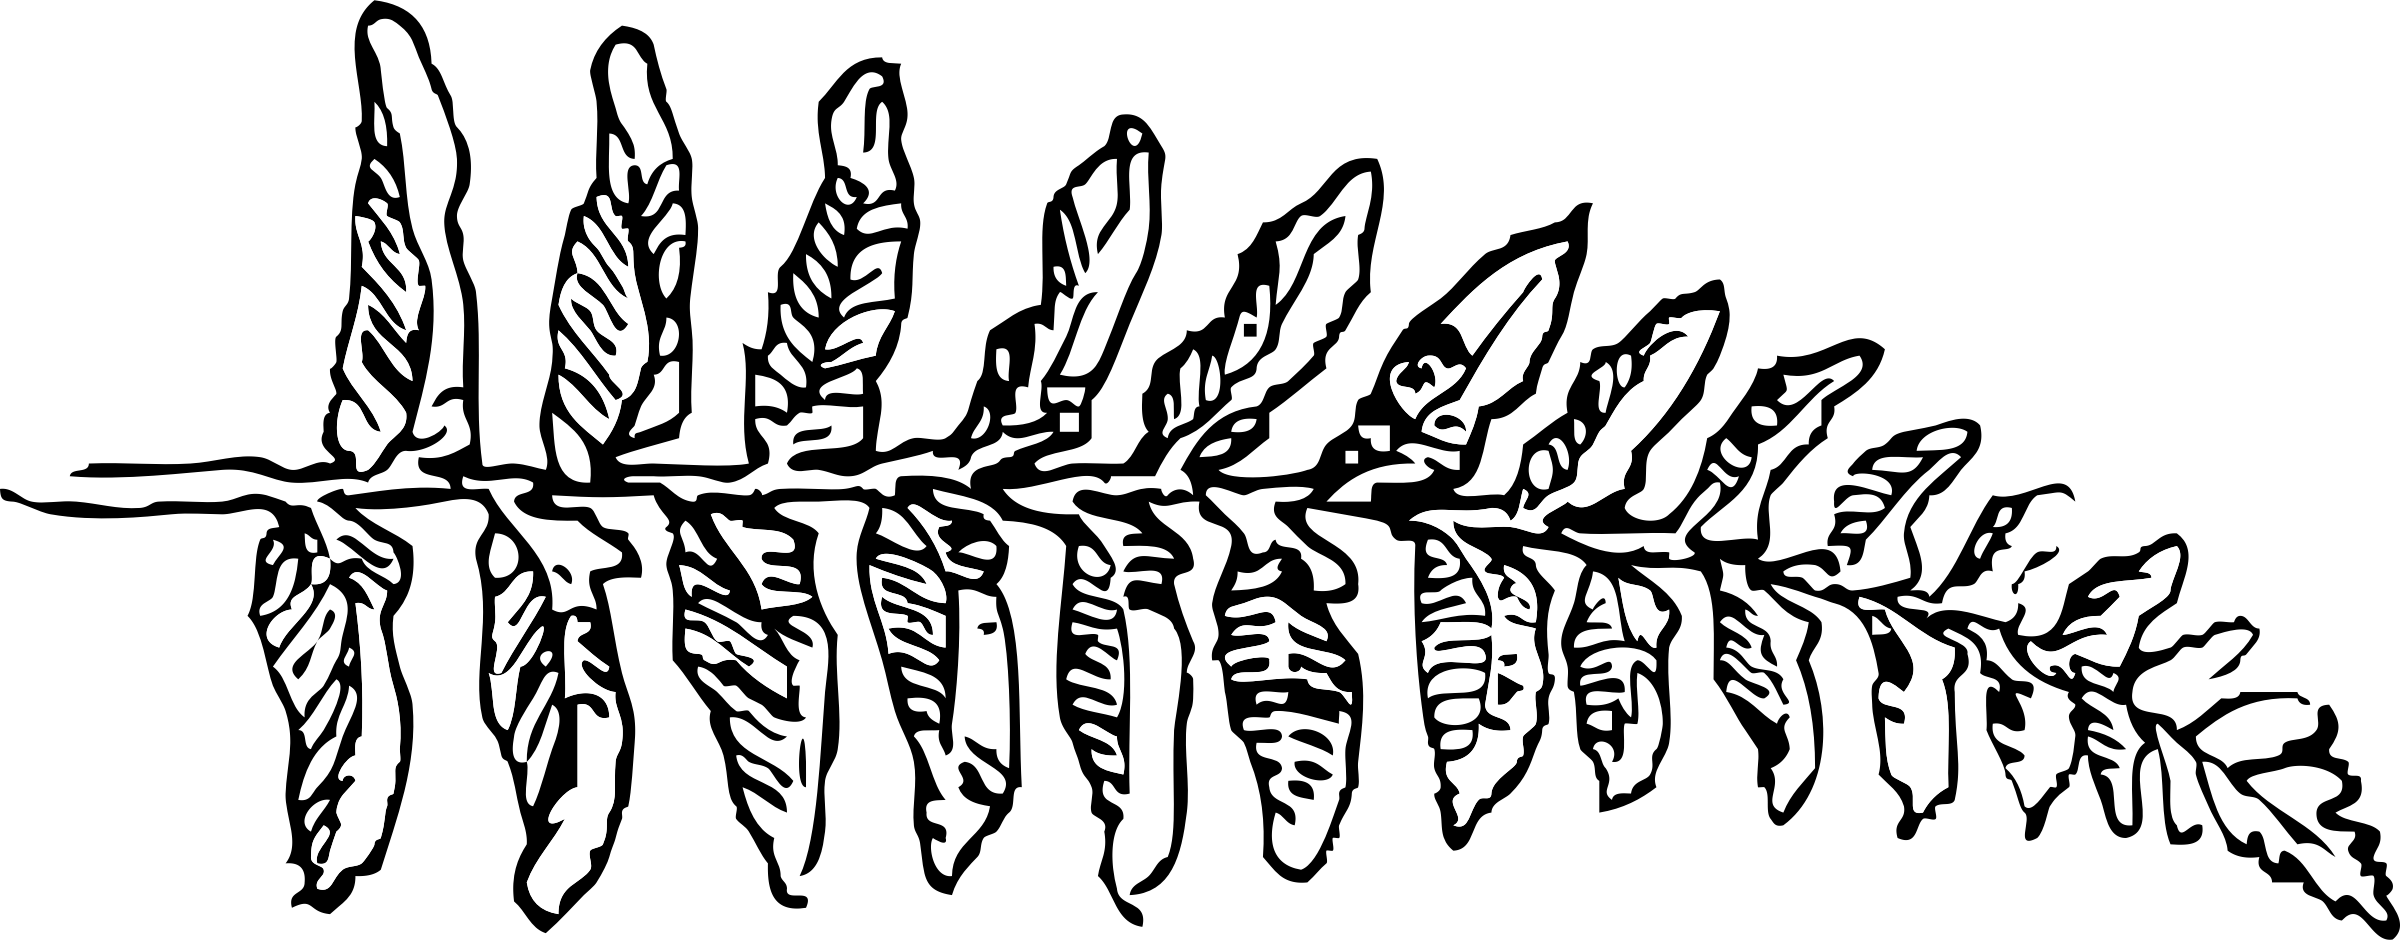 This Free Icons Png Design Of Fern Branch